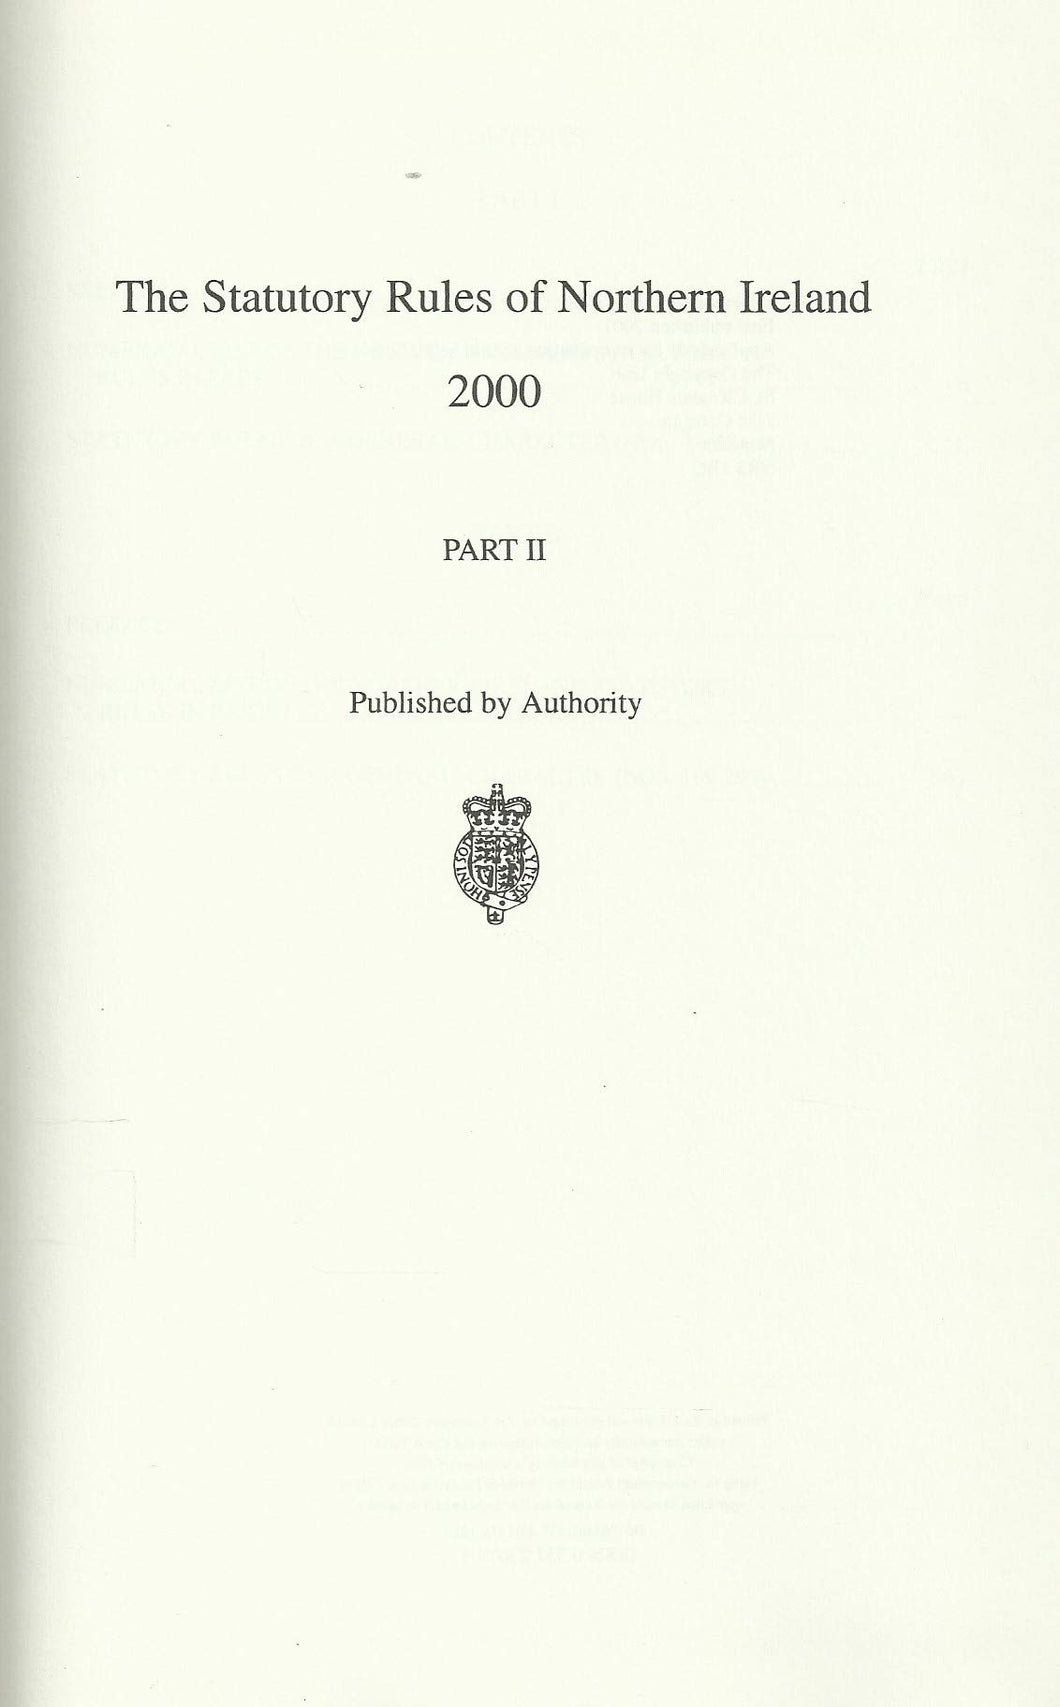 Northern Ireland Statutory Rules and Orders 2000, Part II - The Statutory Rules and Orders of Northern Ireland